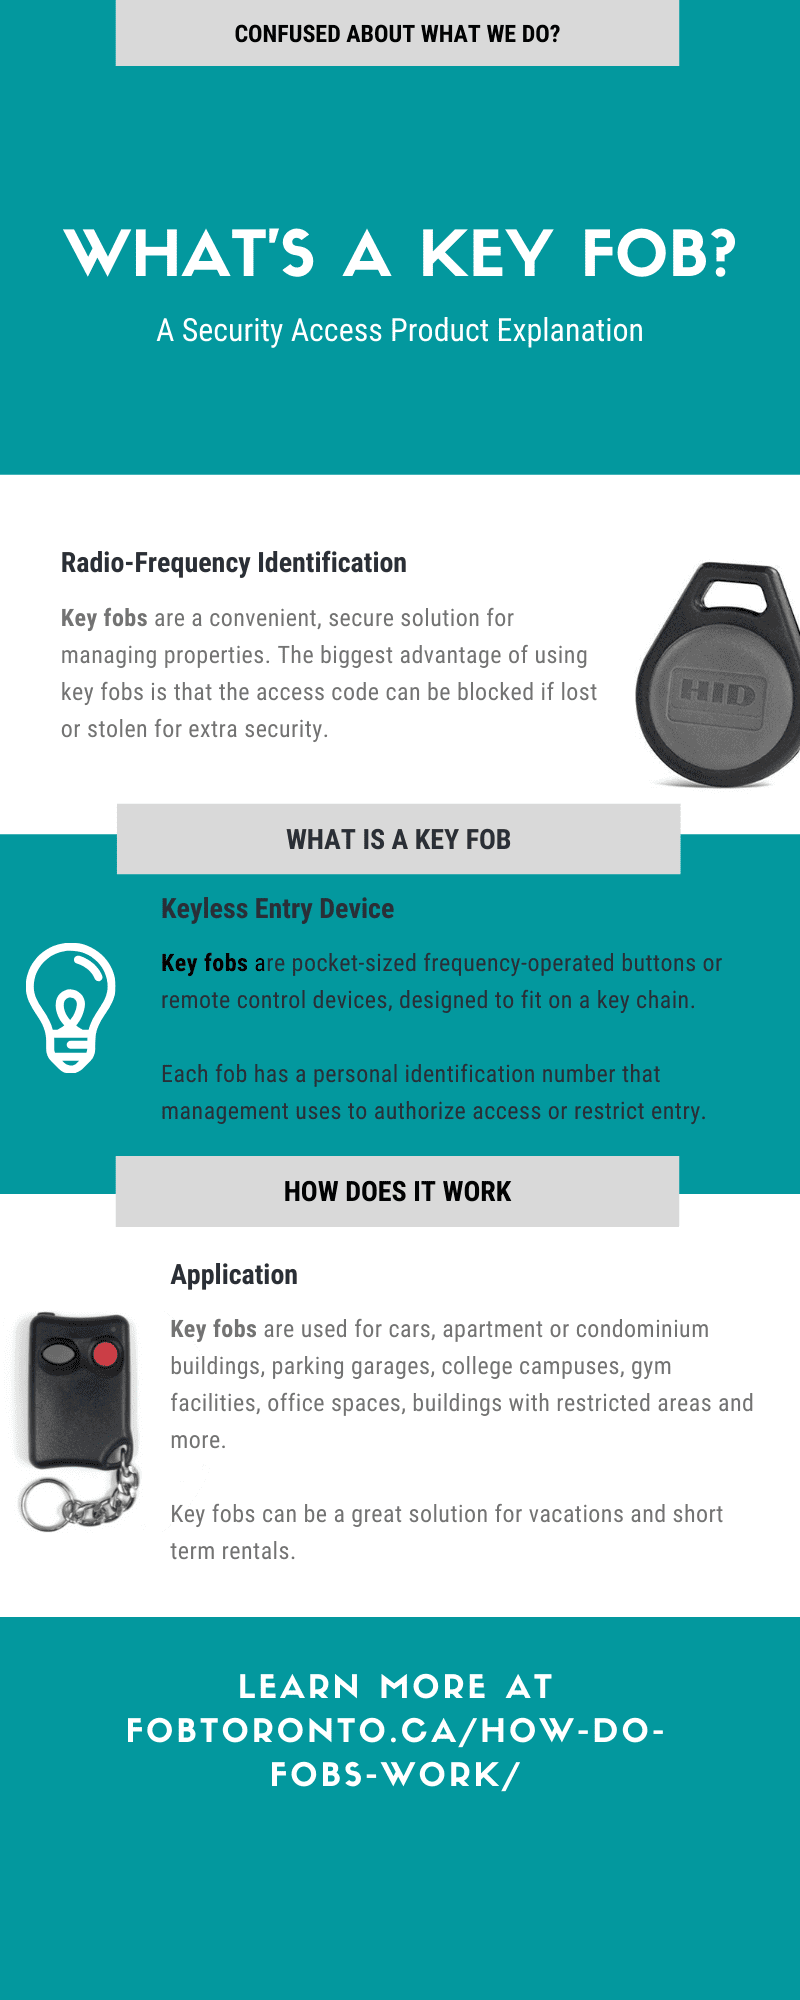 Large Full version of an infographic on what is a key fob infographic from FobToronto the key fob copying service in Toronto